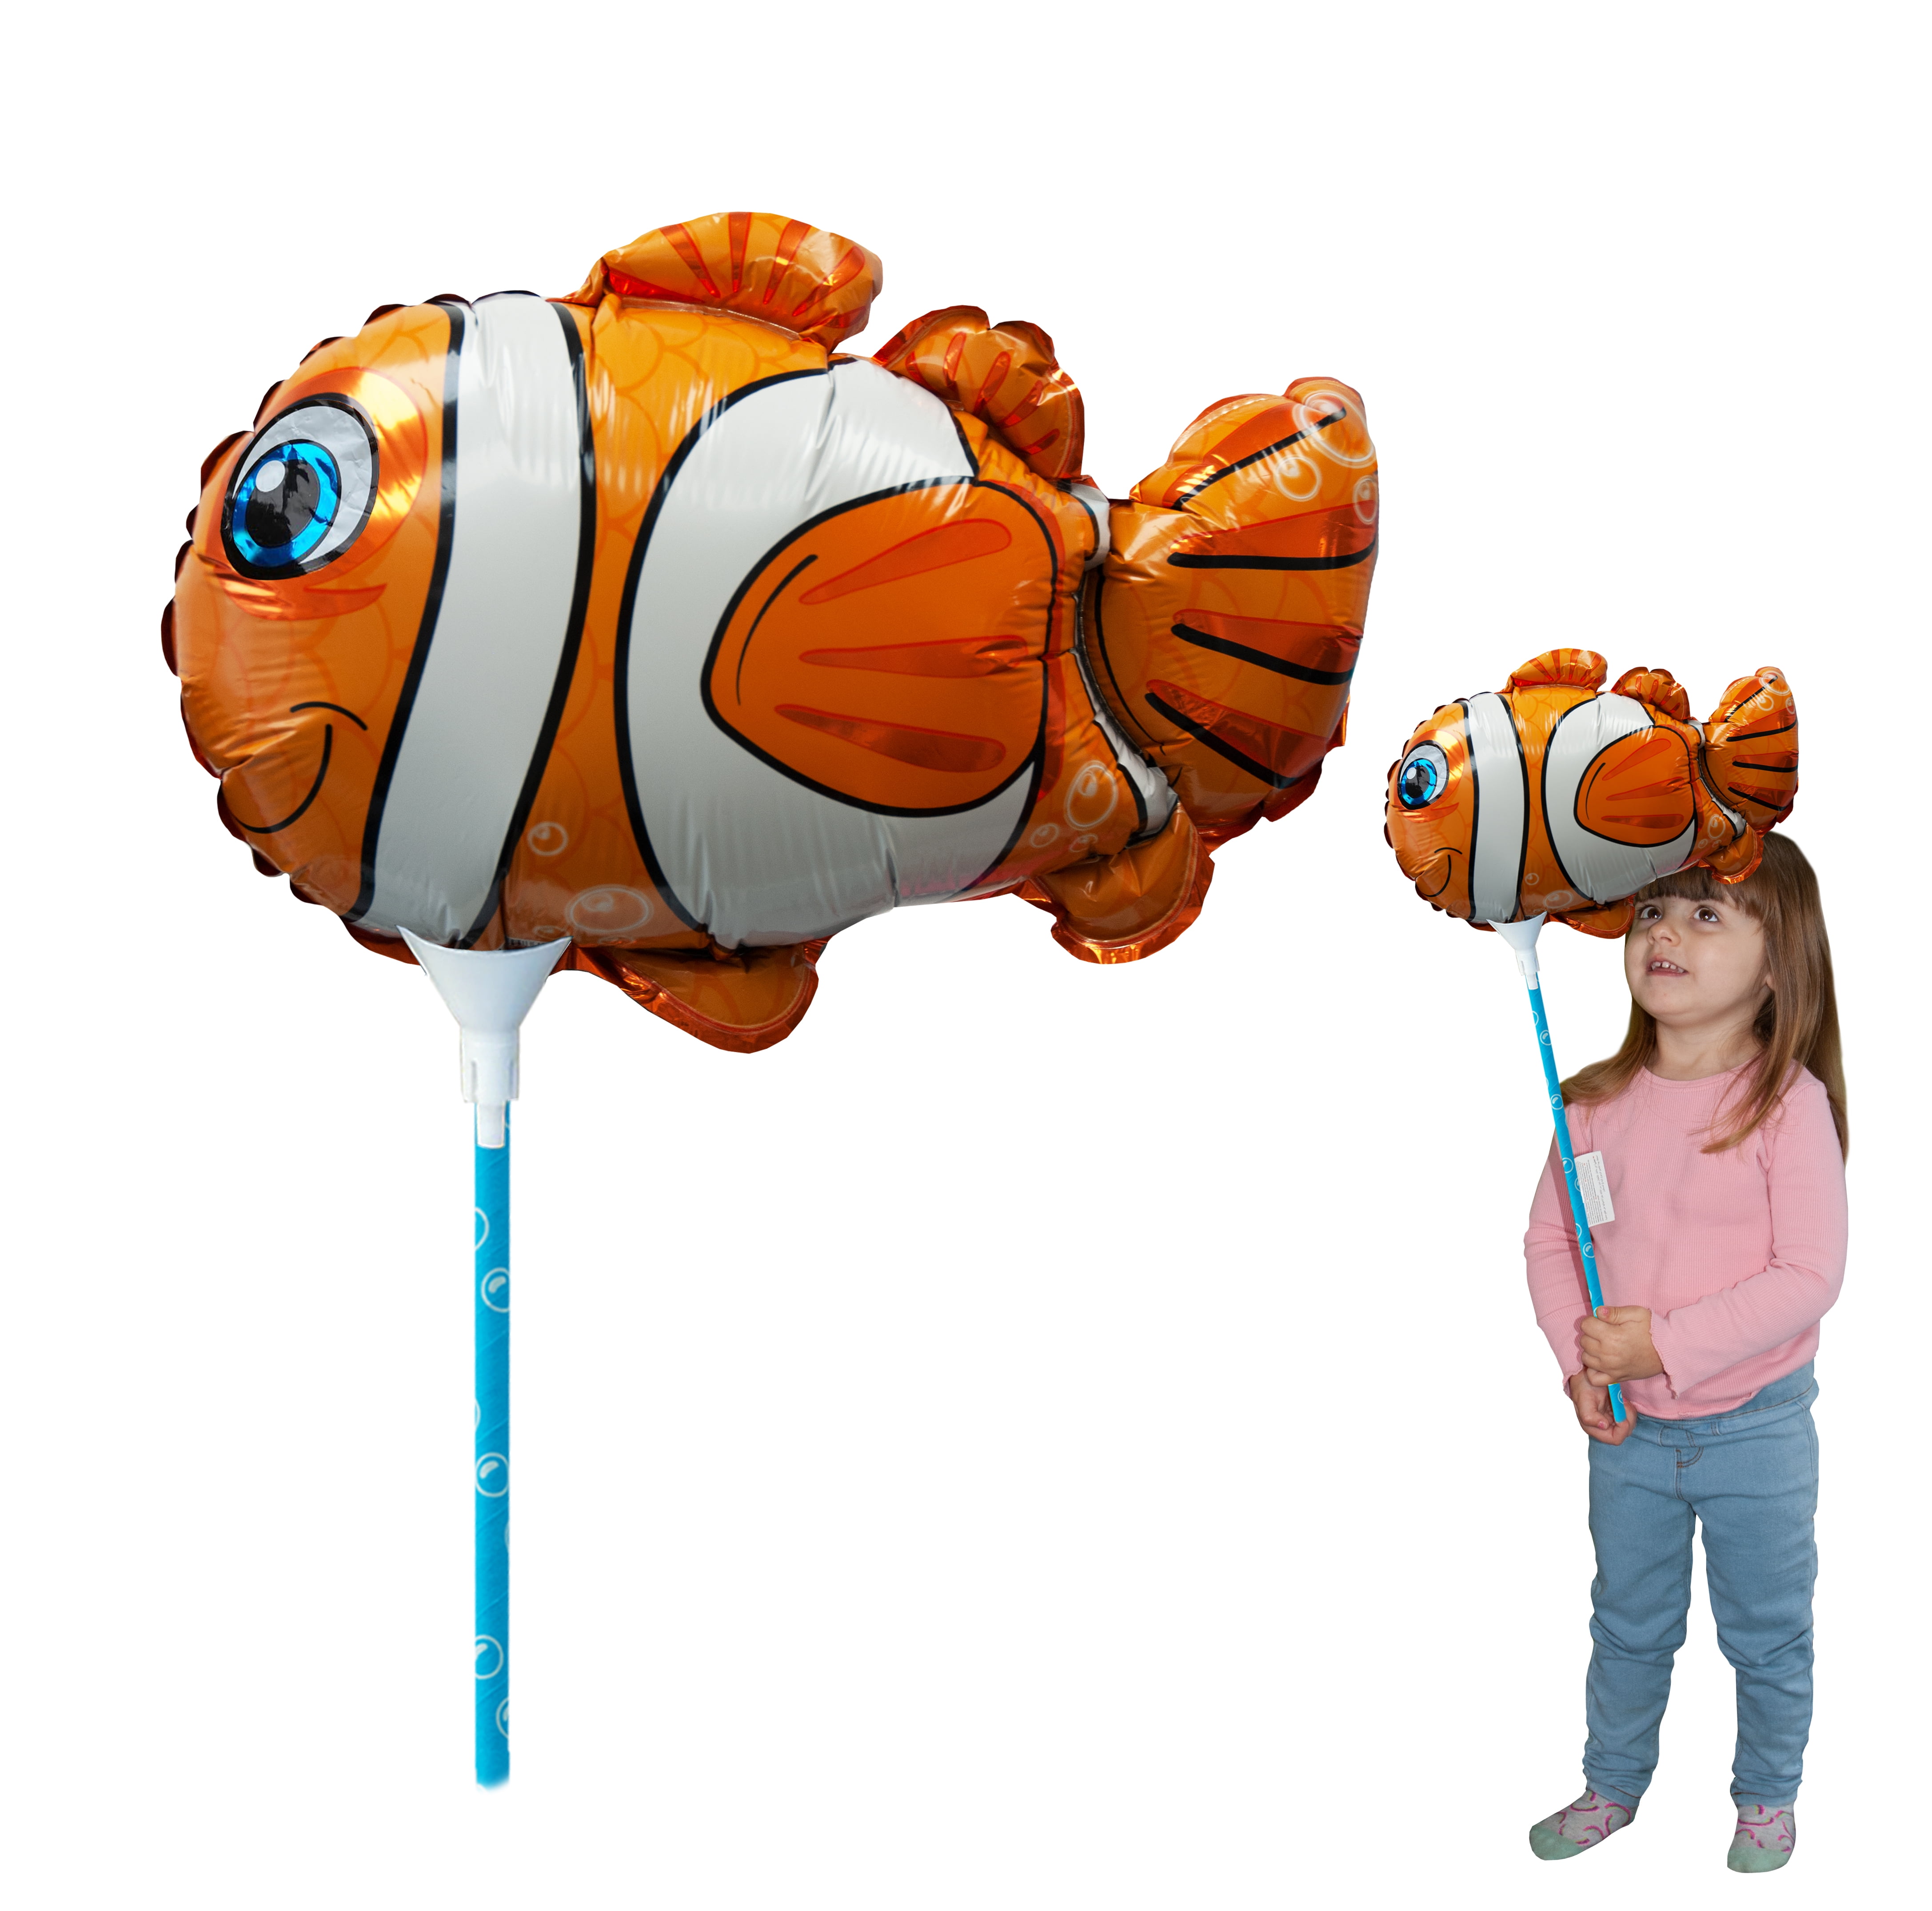 Ballooniacs - Clown Fish Air Filled Balloons from Deluxebase. Colorful  Clown Fish Balloon for Kids Toys. Inflatable Animal Balloon for Birthday